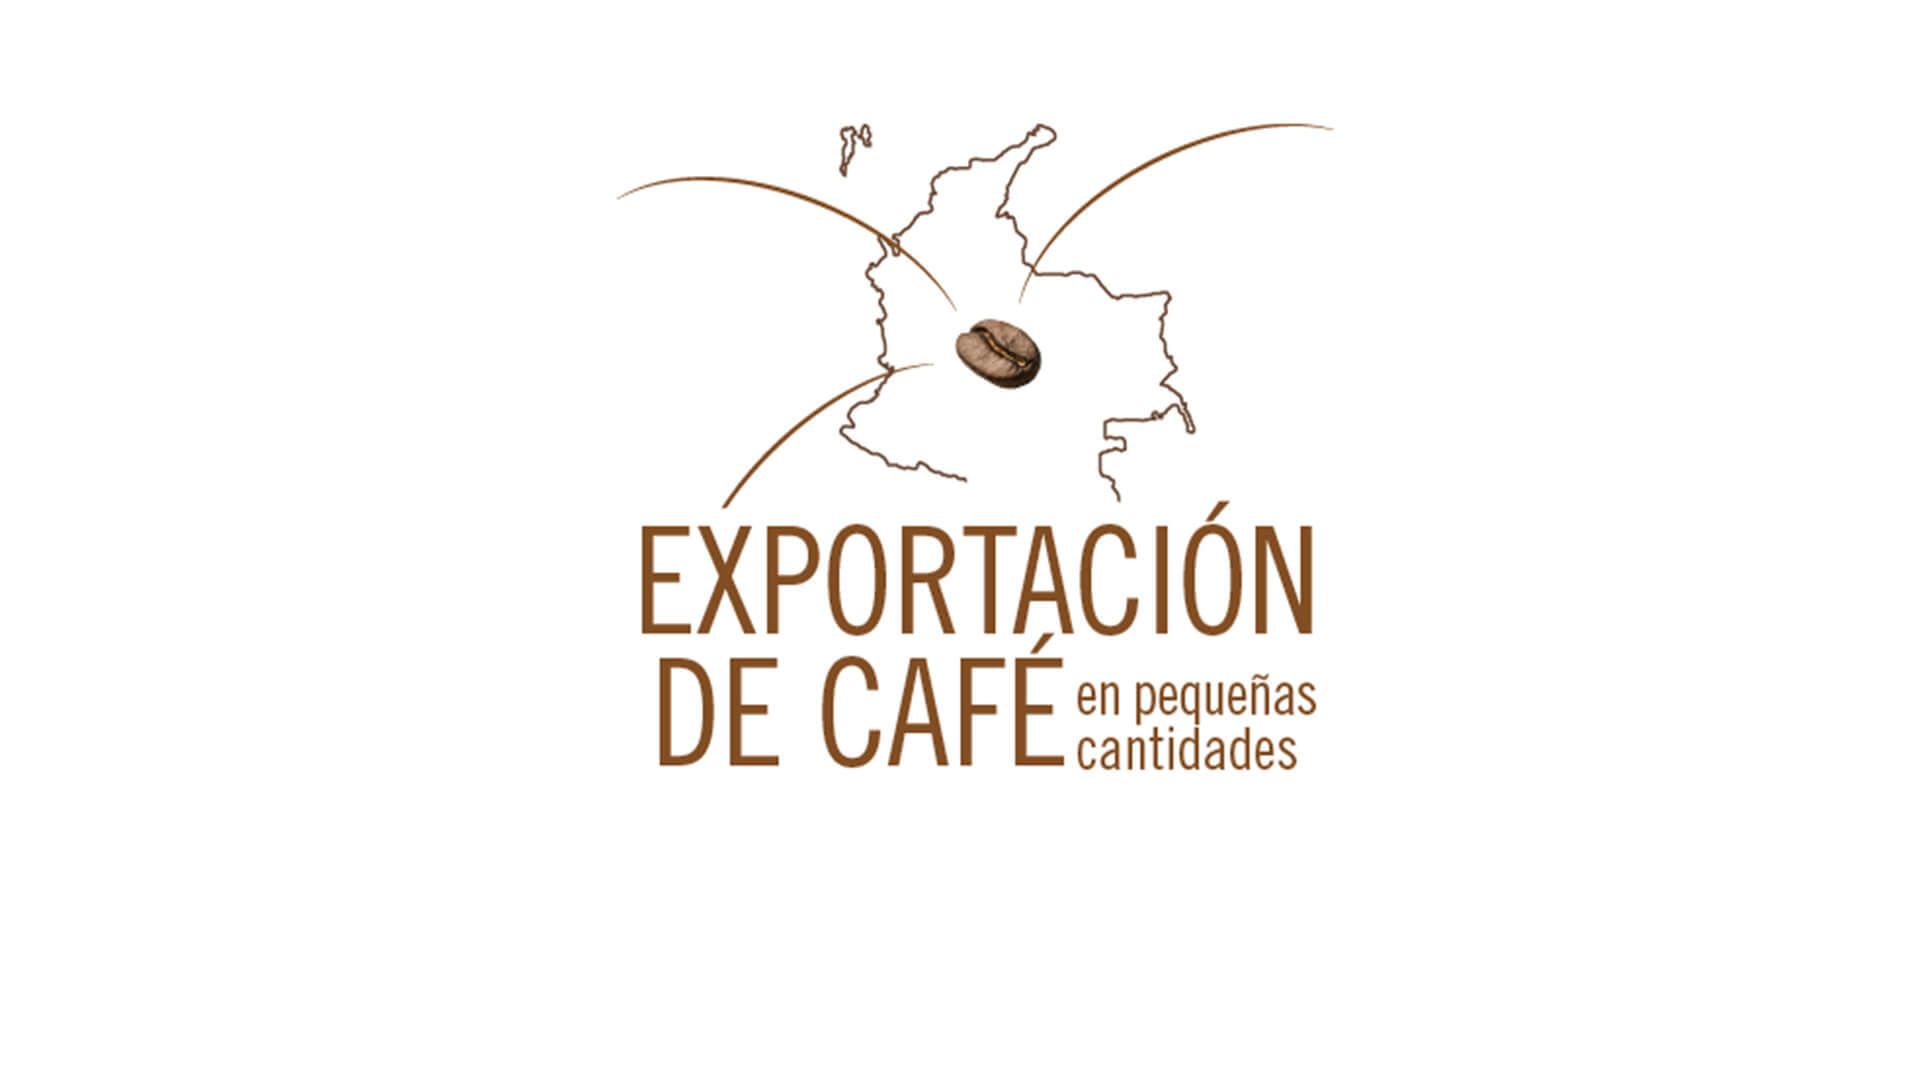 Coffee Export Boost: As a historical fact and in order to boost exports and adjust them to international regulations, the National Coffee Growers Committee changes the regulation and allows, from that date, to export different qualities of Colombian coffee.